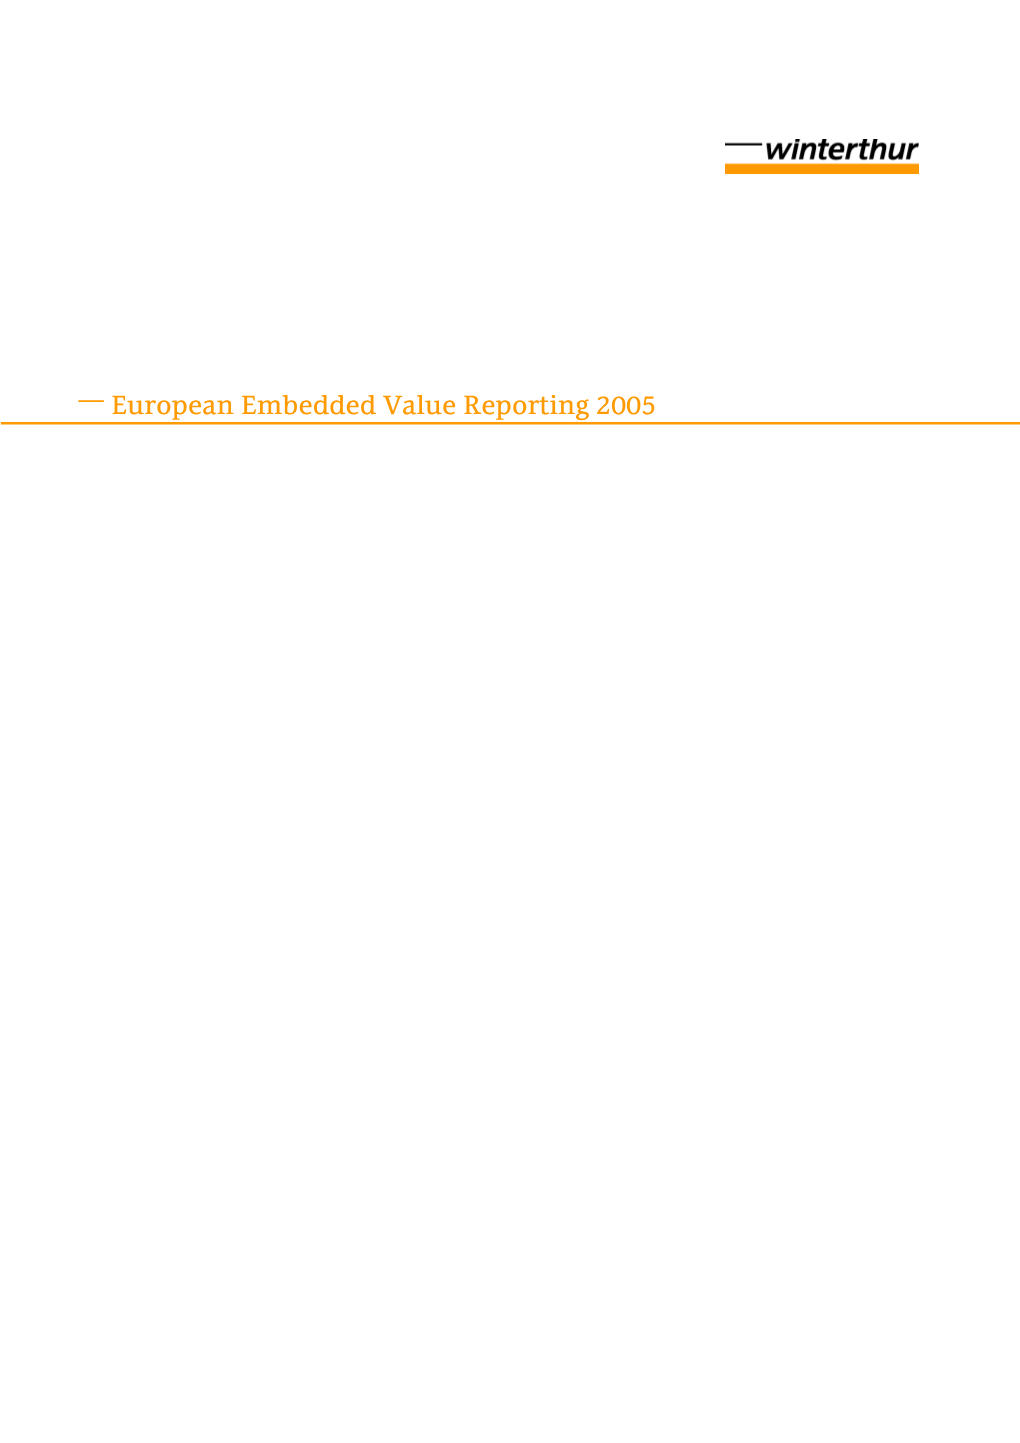 ―European Embedded Value Reporting 2005